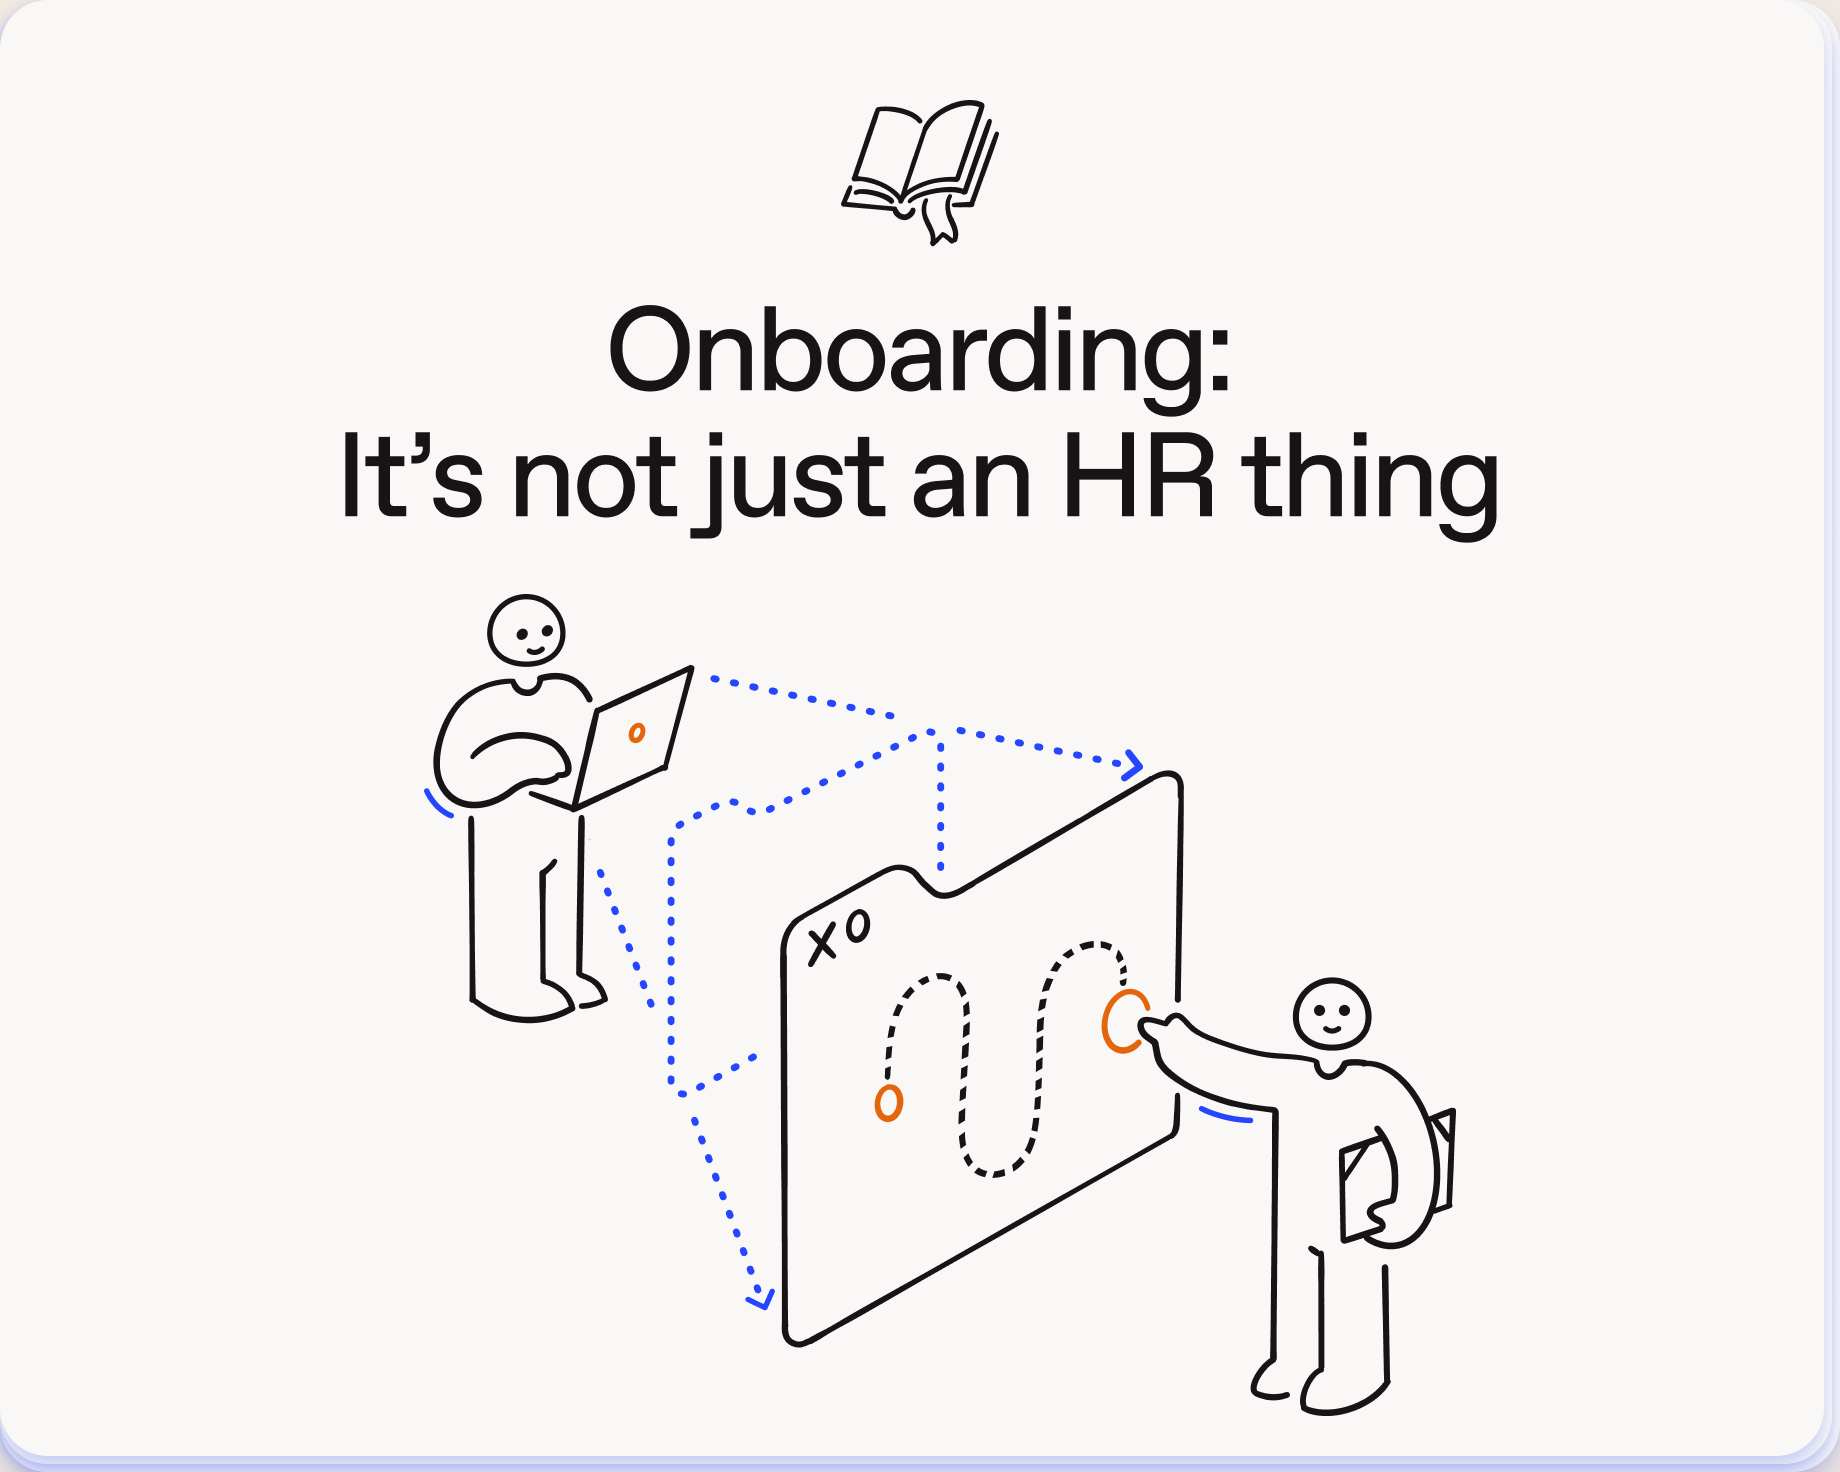 onboarding is not just an HR thing